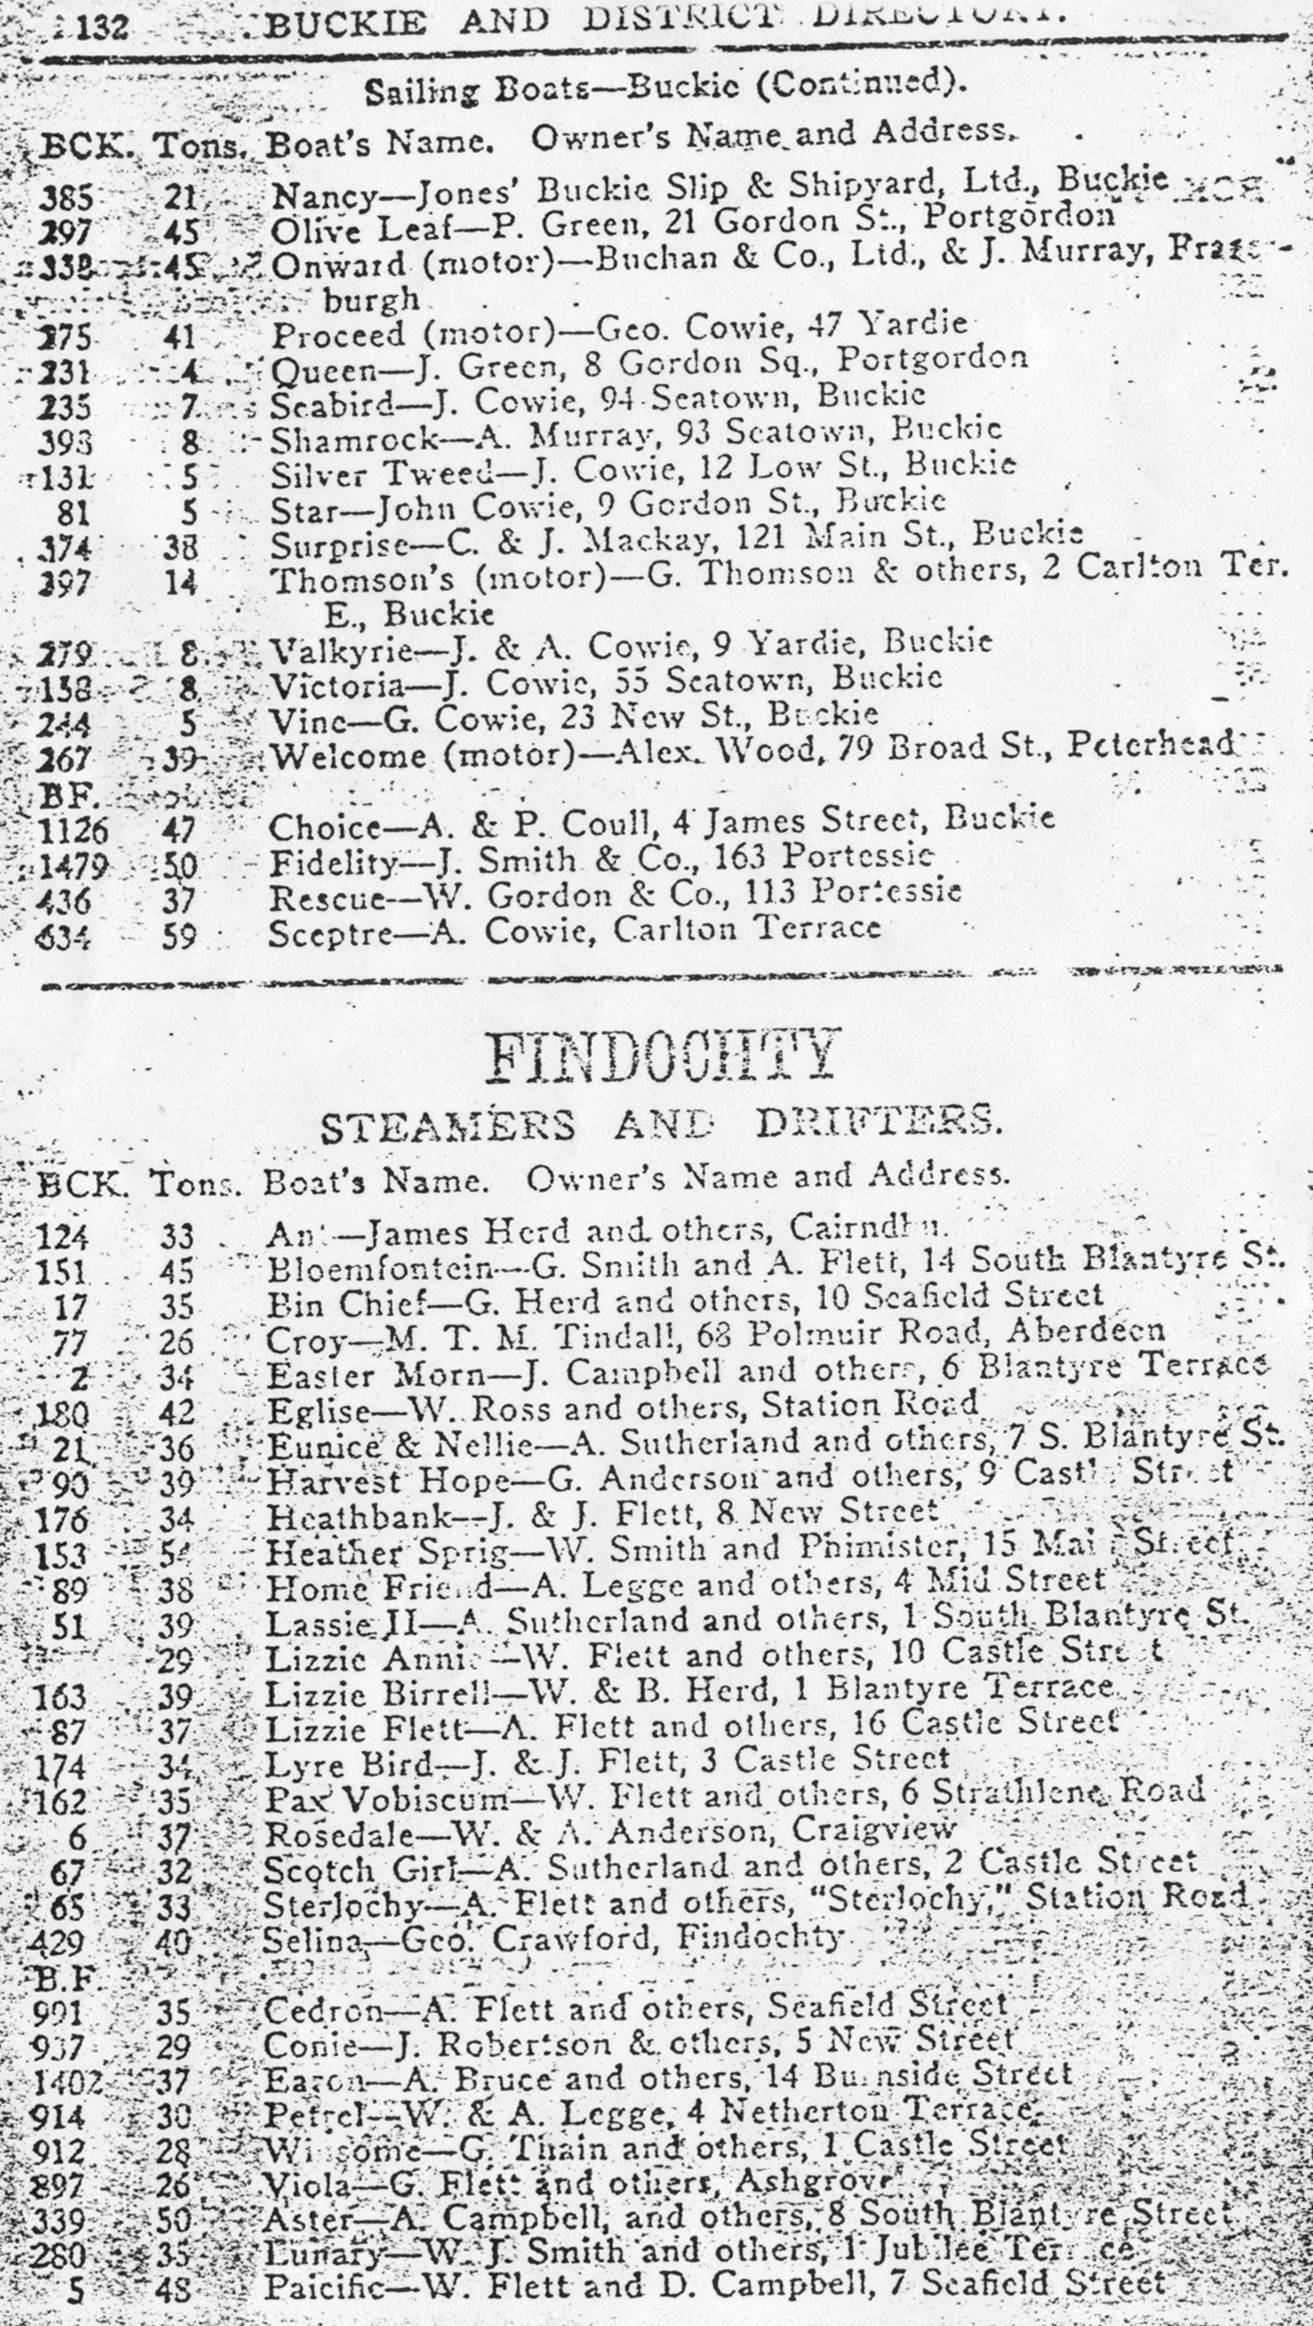 Buckie and District Directory 1926, page 132, Steamers and Drifters